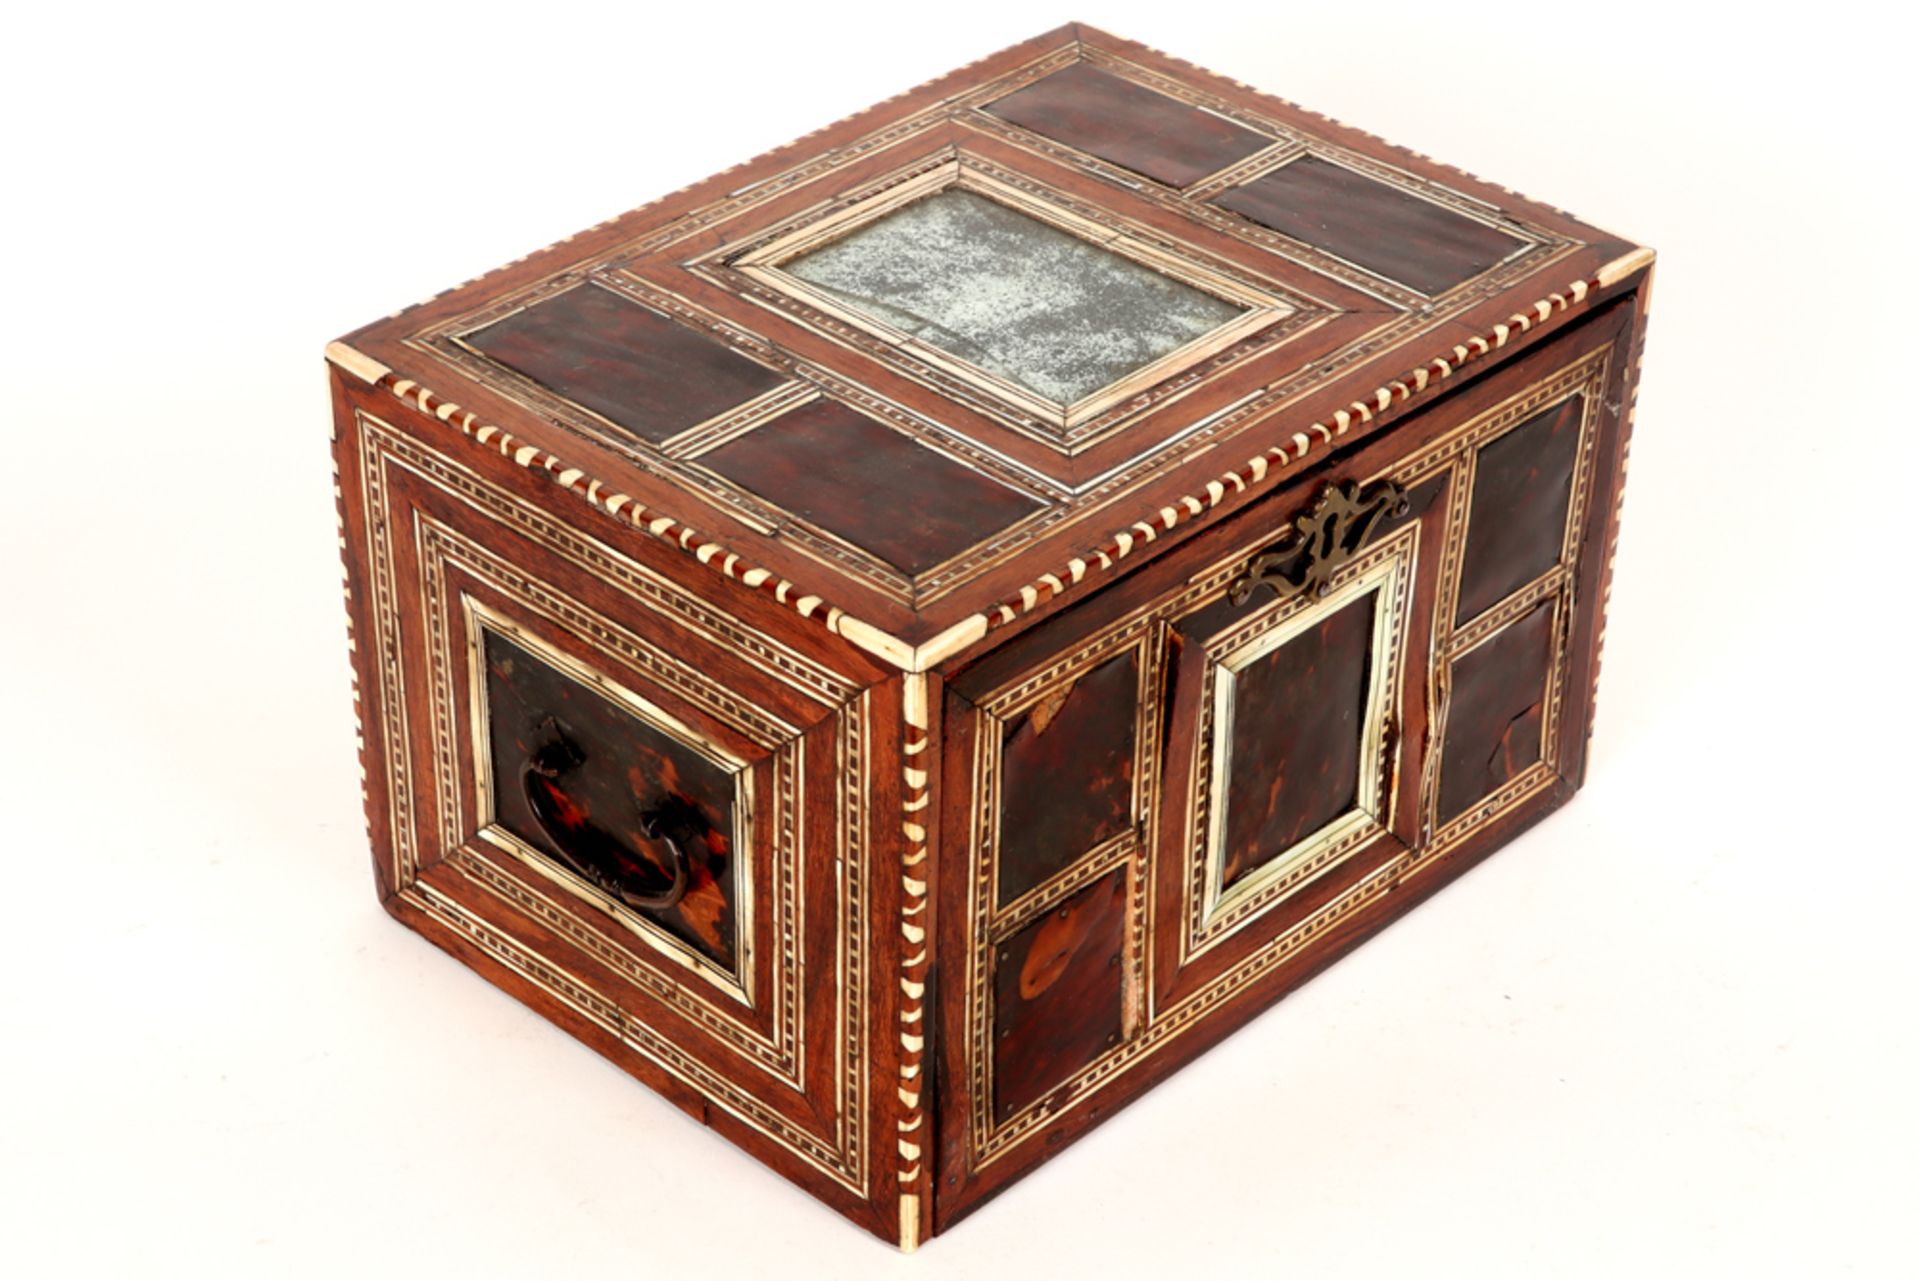 17th Cent. Indo-Portuguese table cabinet in rose-wood, ivory and tortoiseshell with an original